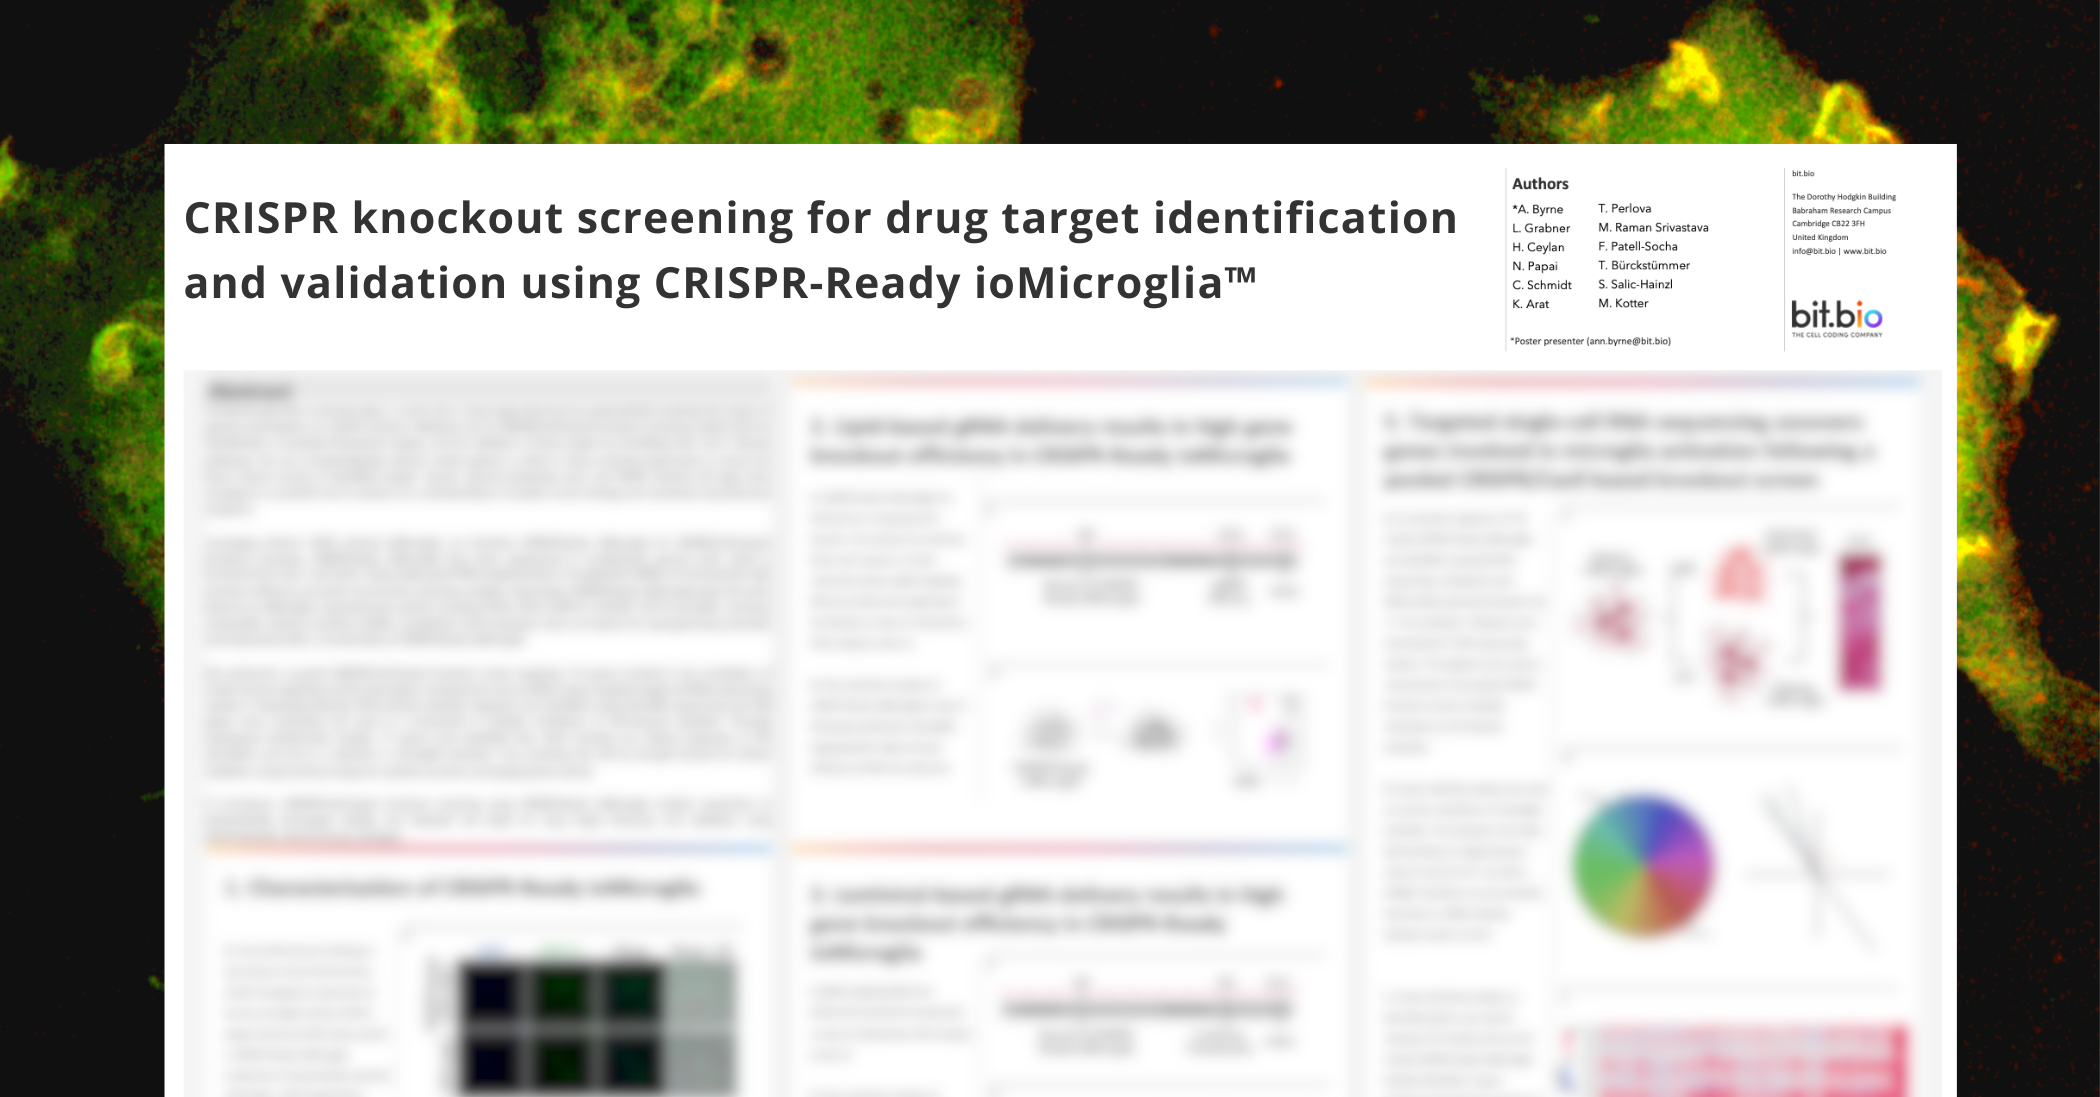 A preview of a scientific poster showcasing CRISPR-ready cells. This poster shows an iPSC derived cell made to help scientist achieve for CRISPR gene knockouts and CRISPR screens helping users with target identification drug discovery workflows